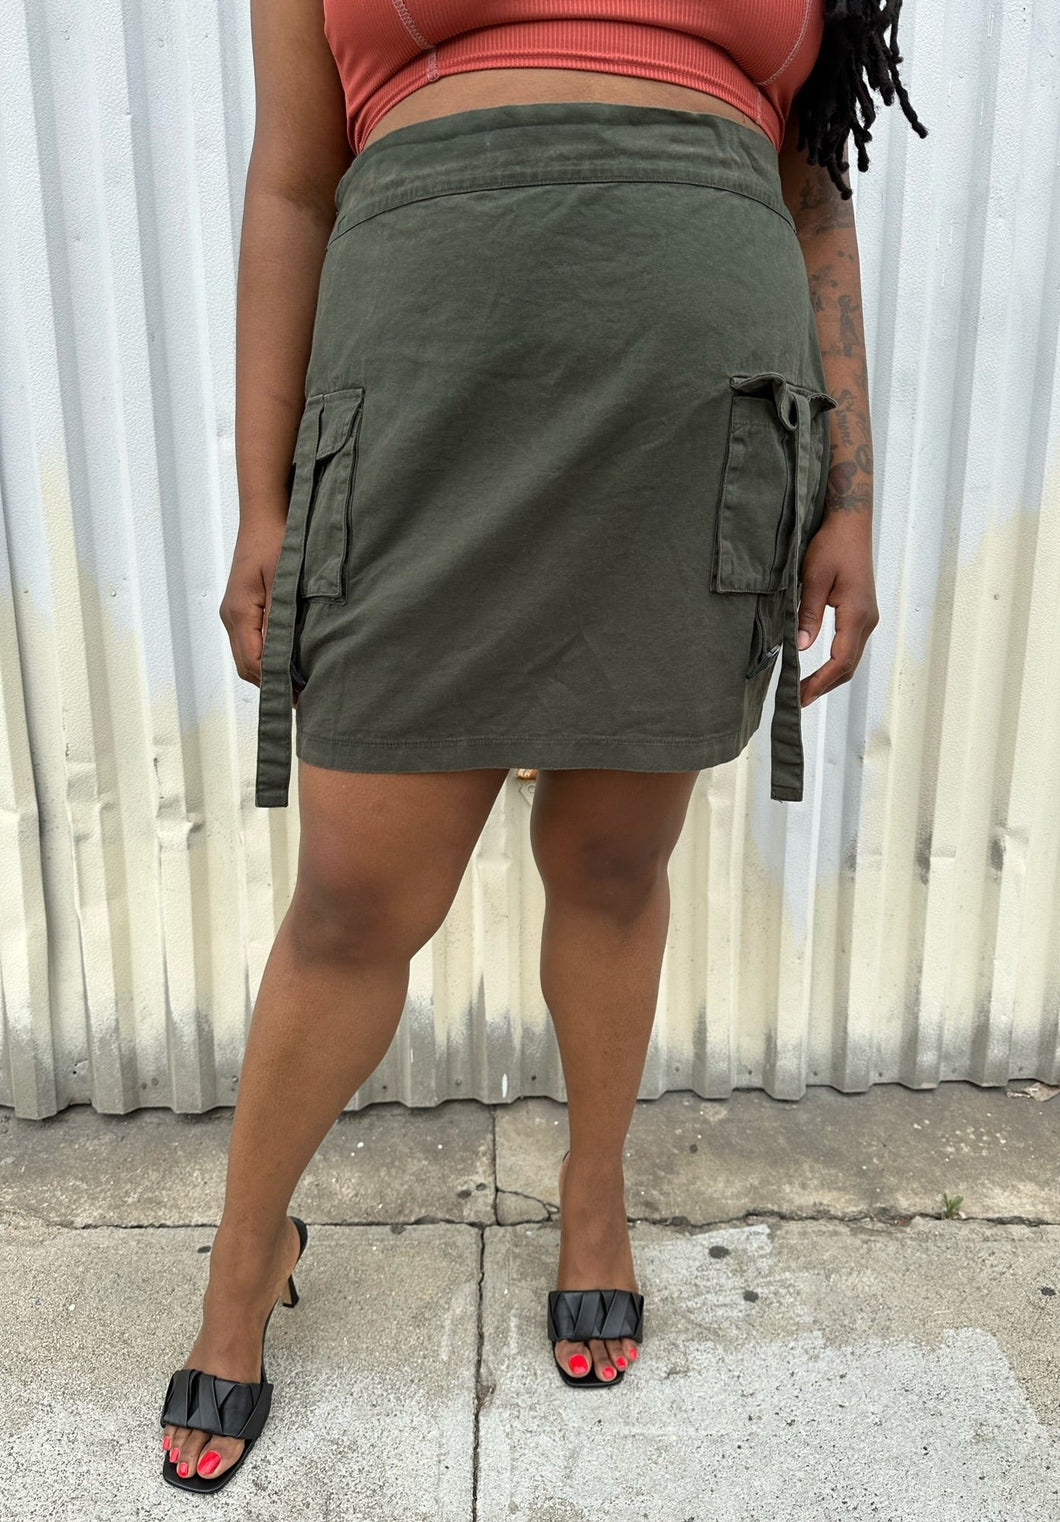 Front view of a size 16 Pretty Little Thing muted army green cargo-style mini skirt with utility strap details styled with a rust-peach crop tank and black kitten heels on a size 14/16 model. The photo is taken outside in natural lighting.